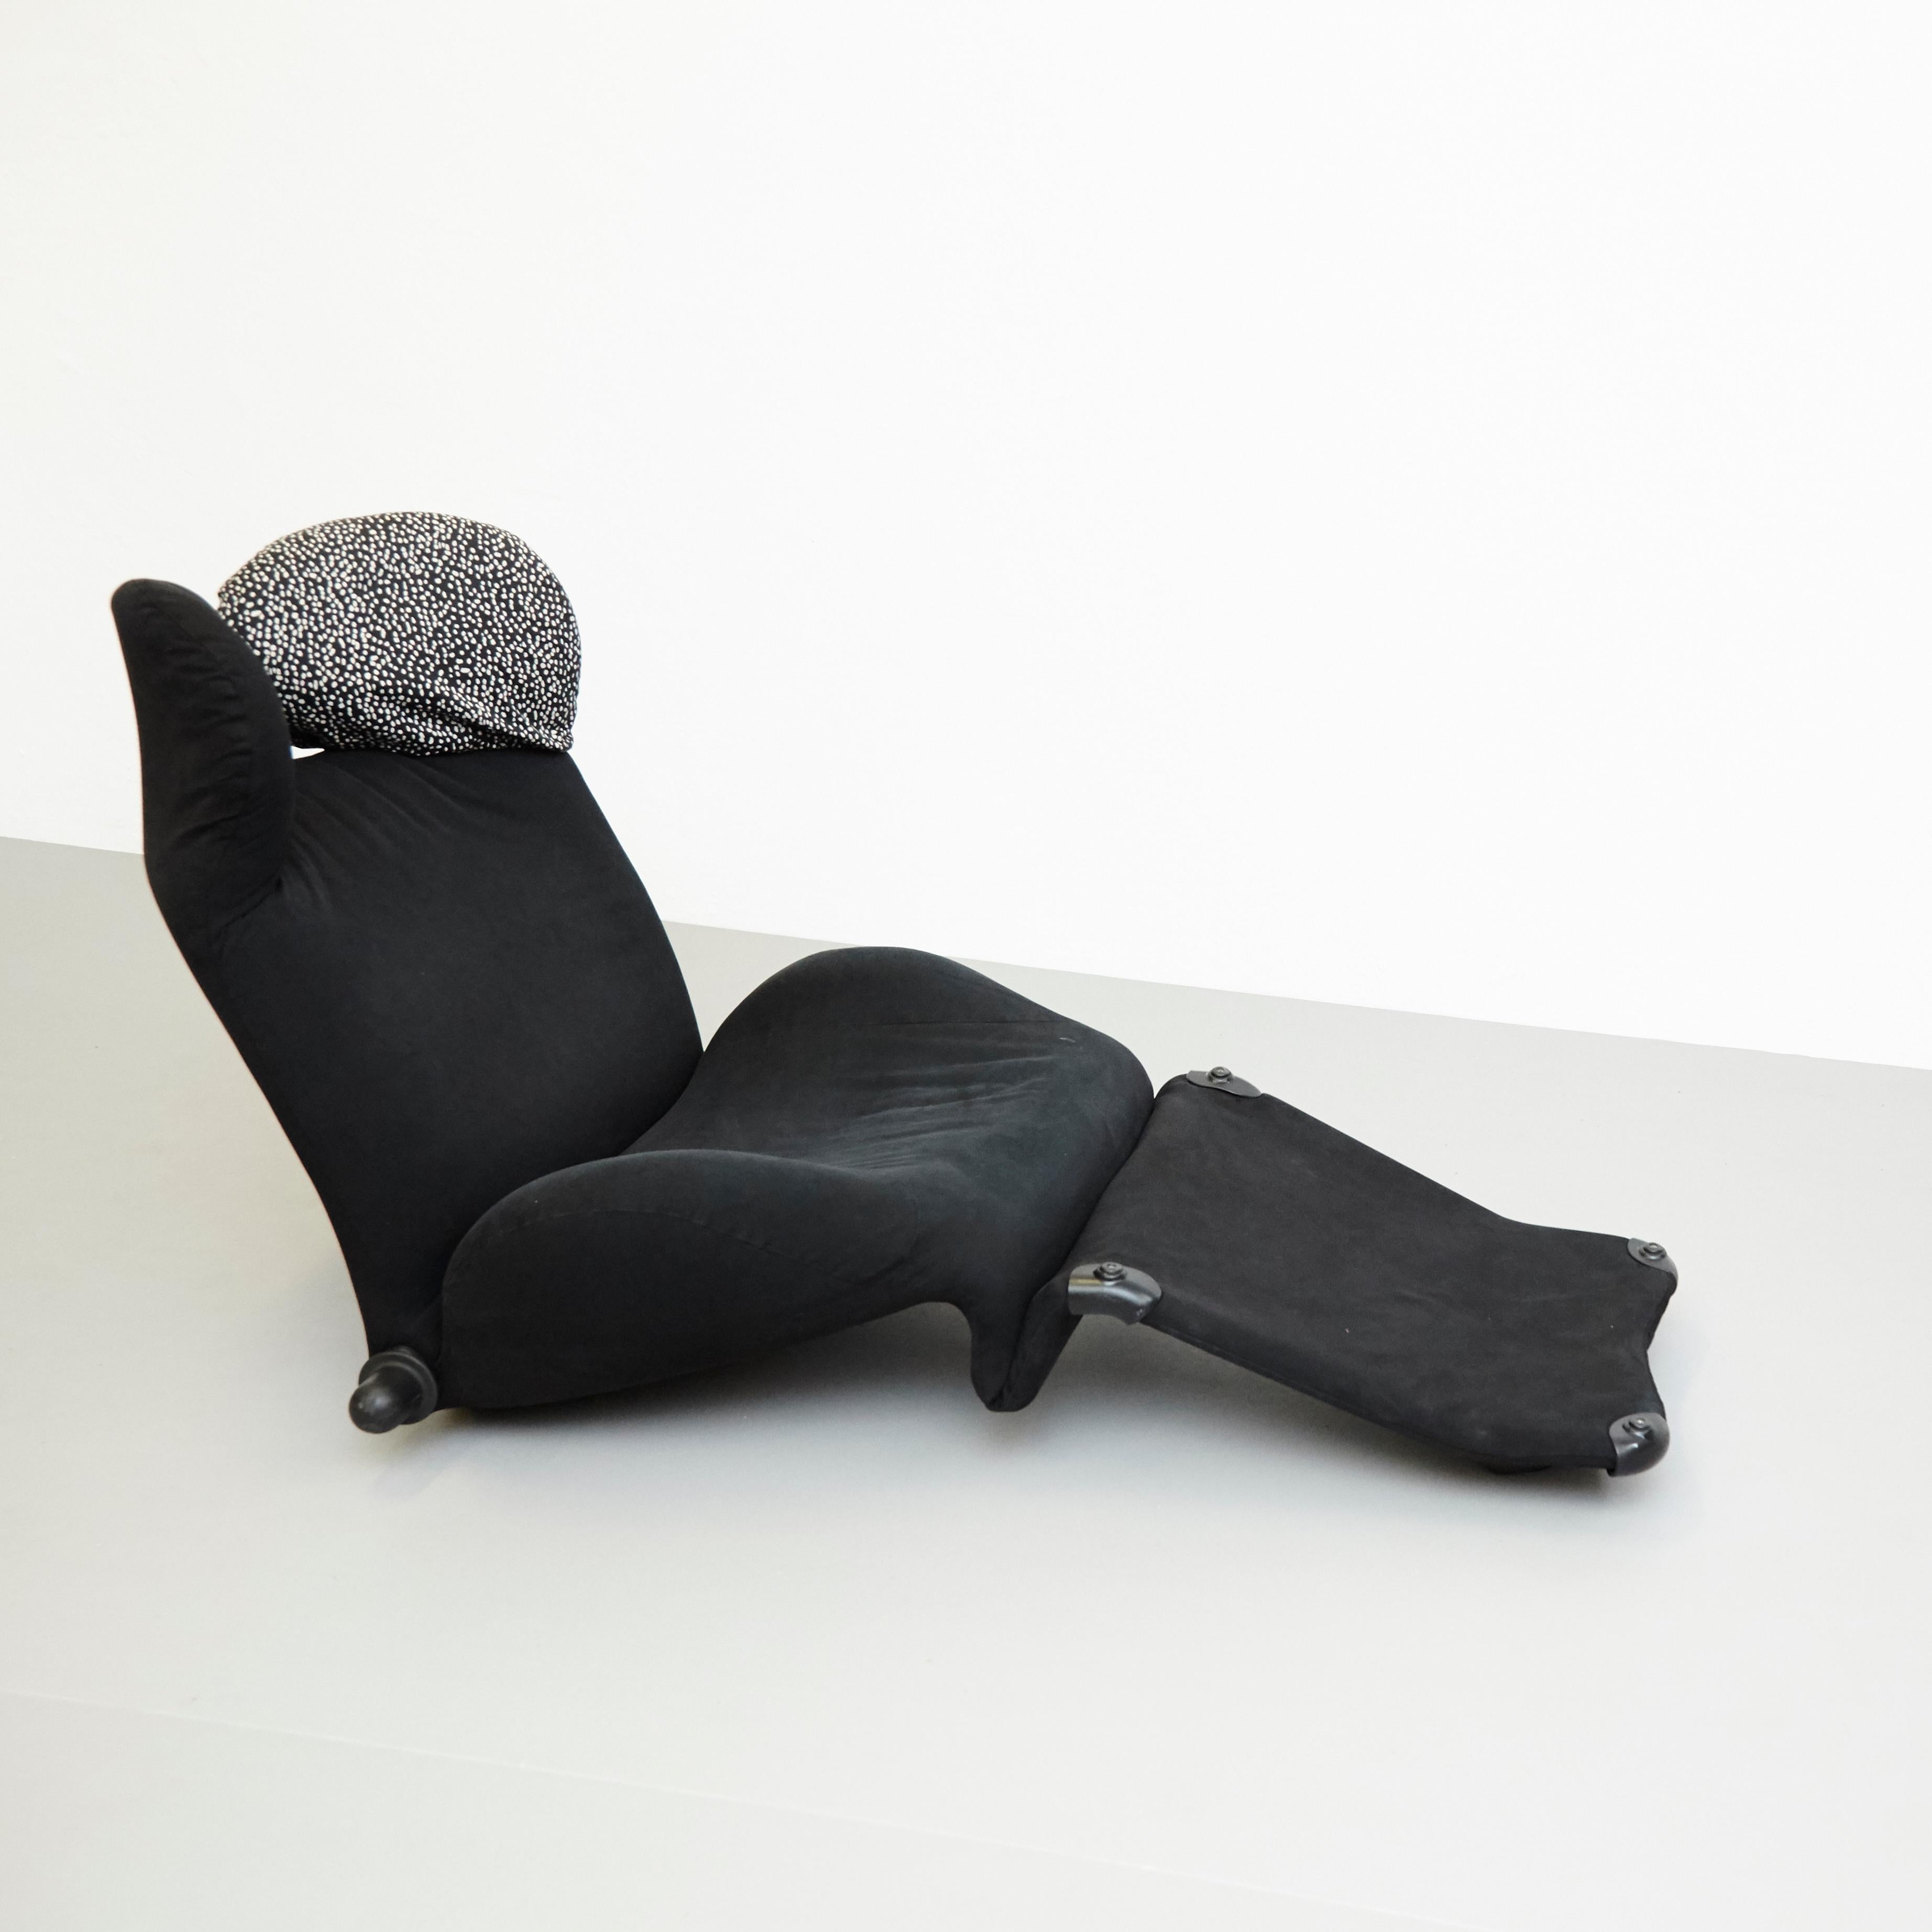 Armchair Wink 111 designed Toshiyuki Kita in 1980.

Ergonomically correct and exquisitely versatile, Wink armchair cleverly unfolds into a chaise lounge. The back, and head-rest can be adjusted by means of the handles on the side, these being